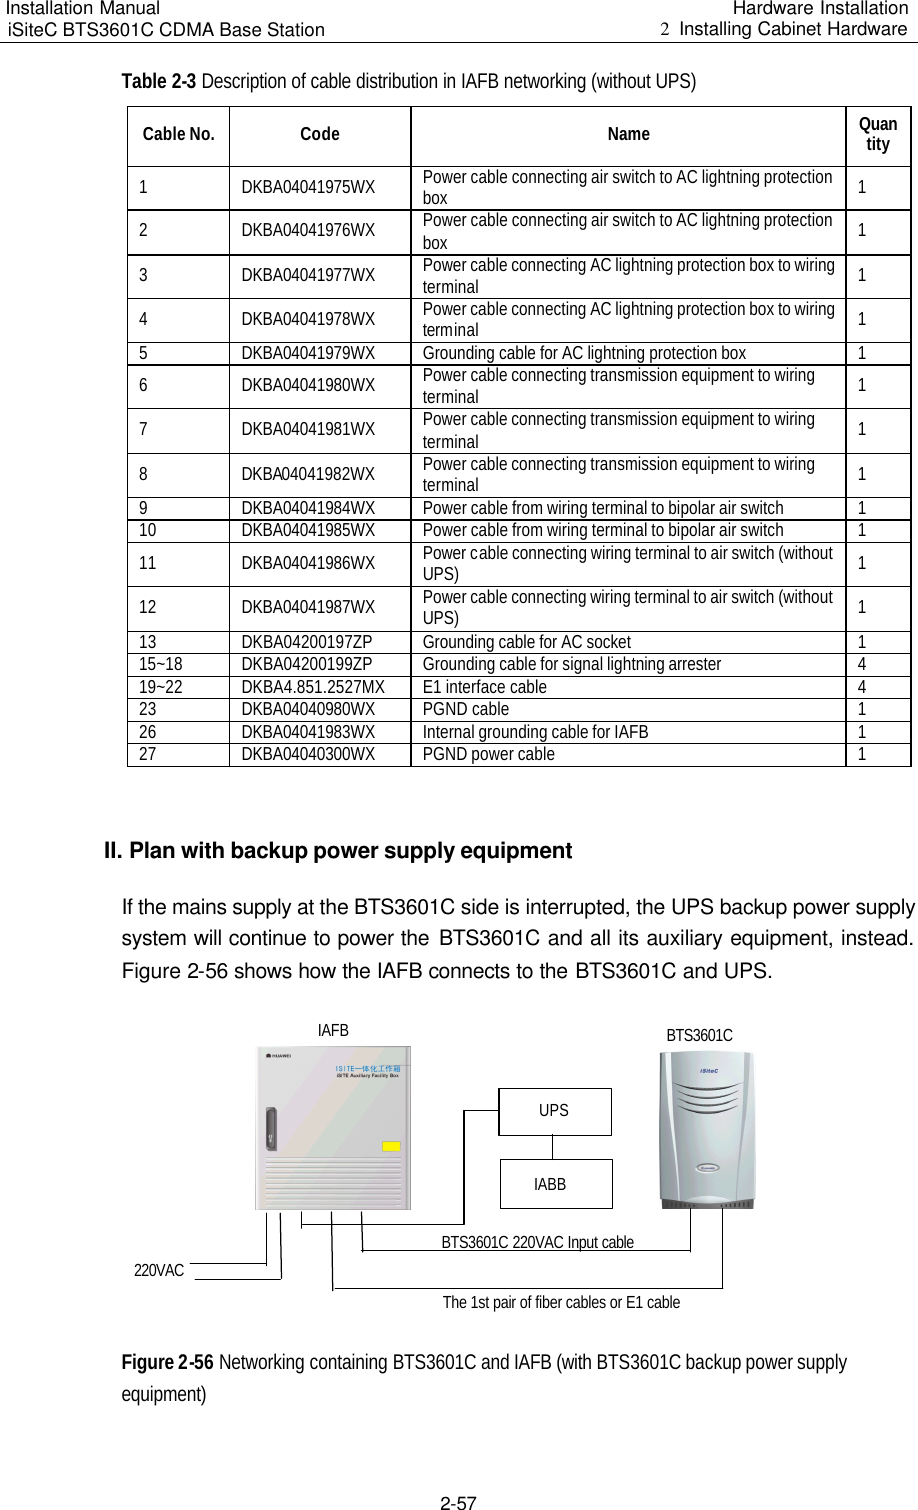 Installation Manual   iSiteC BTS3601C CDMA Base Station Hardware Installation 2  Installing Cabinet Hardware  2-57 Table 2-3 Description of cable distribution in IAFB networking (without UPS) Cable No. Code Name Quantity 1 DKBA04041975WX Power cable connecting air switch to AC lightning protection box 1 2 DKBA04041976WX Power cable connecting air switch to AC lightning protection box 1 3 DKBA04041977WX Power cable connecting AC lightning protection box to wiring terminal  1 4 DKBA04041978WX Power cable connecting AC lightning protection box to wiring terminal  1 5 DKBA04041979WX Grounding cable for AC lightning protection box  1 6 DKBA04041980WX Power cable connecting transmission equipment to wiring terminal  1 7 DKBA04041981WX Power cable connecting transmission equipment to wiring terminal  1 8 DKBA04041982WX Power cable connecting transmission equipment to wiring terminal  1 9 DKBA04041984WX Power cable from wiring terminal to bipolar air switch 1 10 DKBA04041985WX Power cable from wiring terminal to bipolar air switch 1 11 DKBA04041986WX Power cable connecting wiring terminal to air switch (without UPS) 1 12 DKBA04041987WX Power cable connecting wiring terminal to air switch (without UPS) 1 13 DKBA04200197ZP Grounding cable for AC socket   1 15~18 DKBA04200199ZP Grounding cable for signal lightning arrester  4 19~22 DKBA4.851.2527MX E1 interface cable  4 23 DKBA04040980WX PGND cable  1 26 DKBA04041983WX Internal grounding cable for IAFB 1 27 DKBA04040300WX PGND power cable 1  II. Plan with backup power supply equipment If the mains supply at the BTS3601C side is interrupted, the UPS backup power supply system will continue to power the BTS3601C and all its auxiliary equipment, instead. Figure 2-56 shows how the IAFB connects to the BTS3601C and UPS.  220VACBTS3601C 220VAC Input cableBTS3601CIAFBThe 1st pair of fiber cables or E1 cableUPSIABB Figure 2-56 Networking containing BTS3601C and IAFB (with BTS3601C backup power supply equipment) 